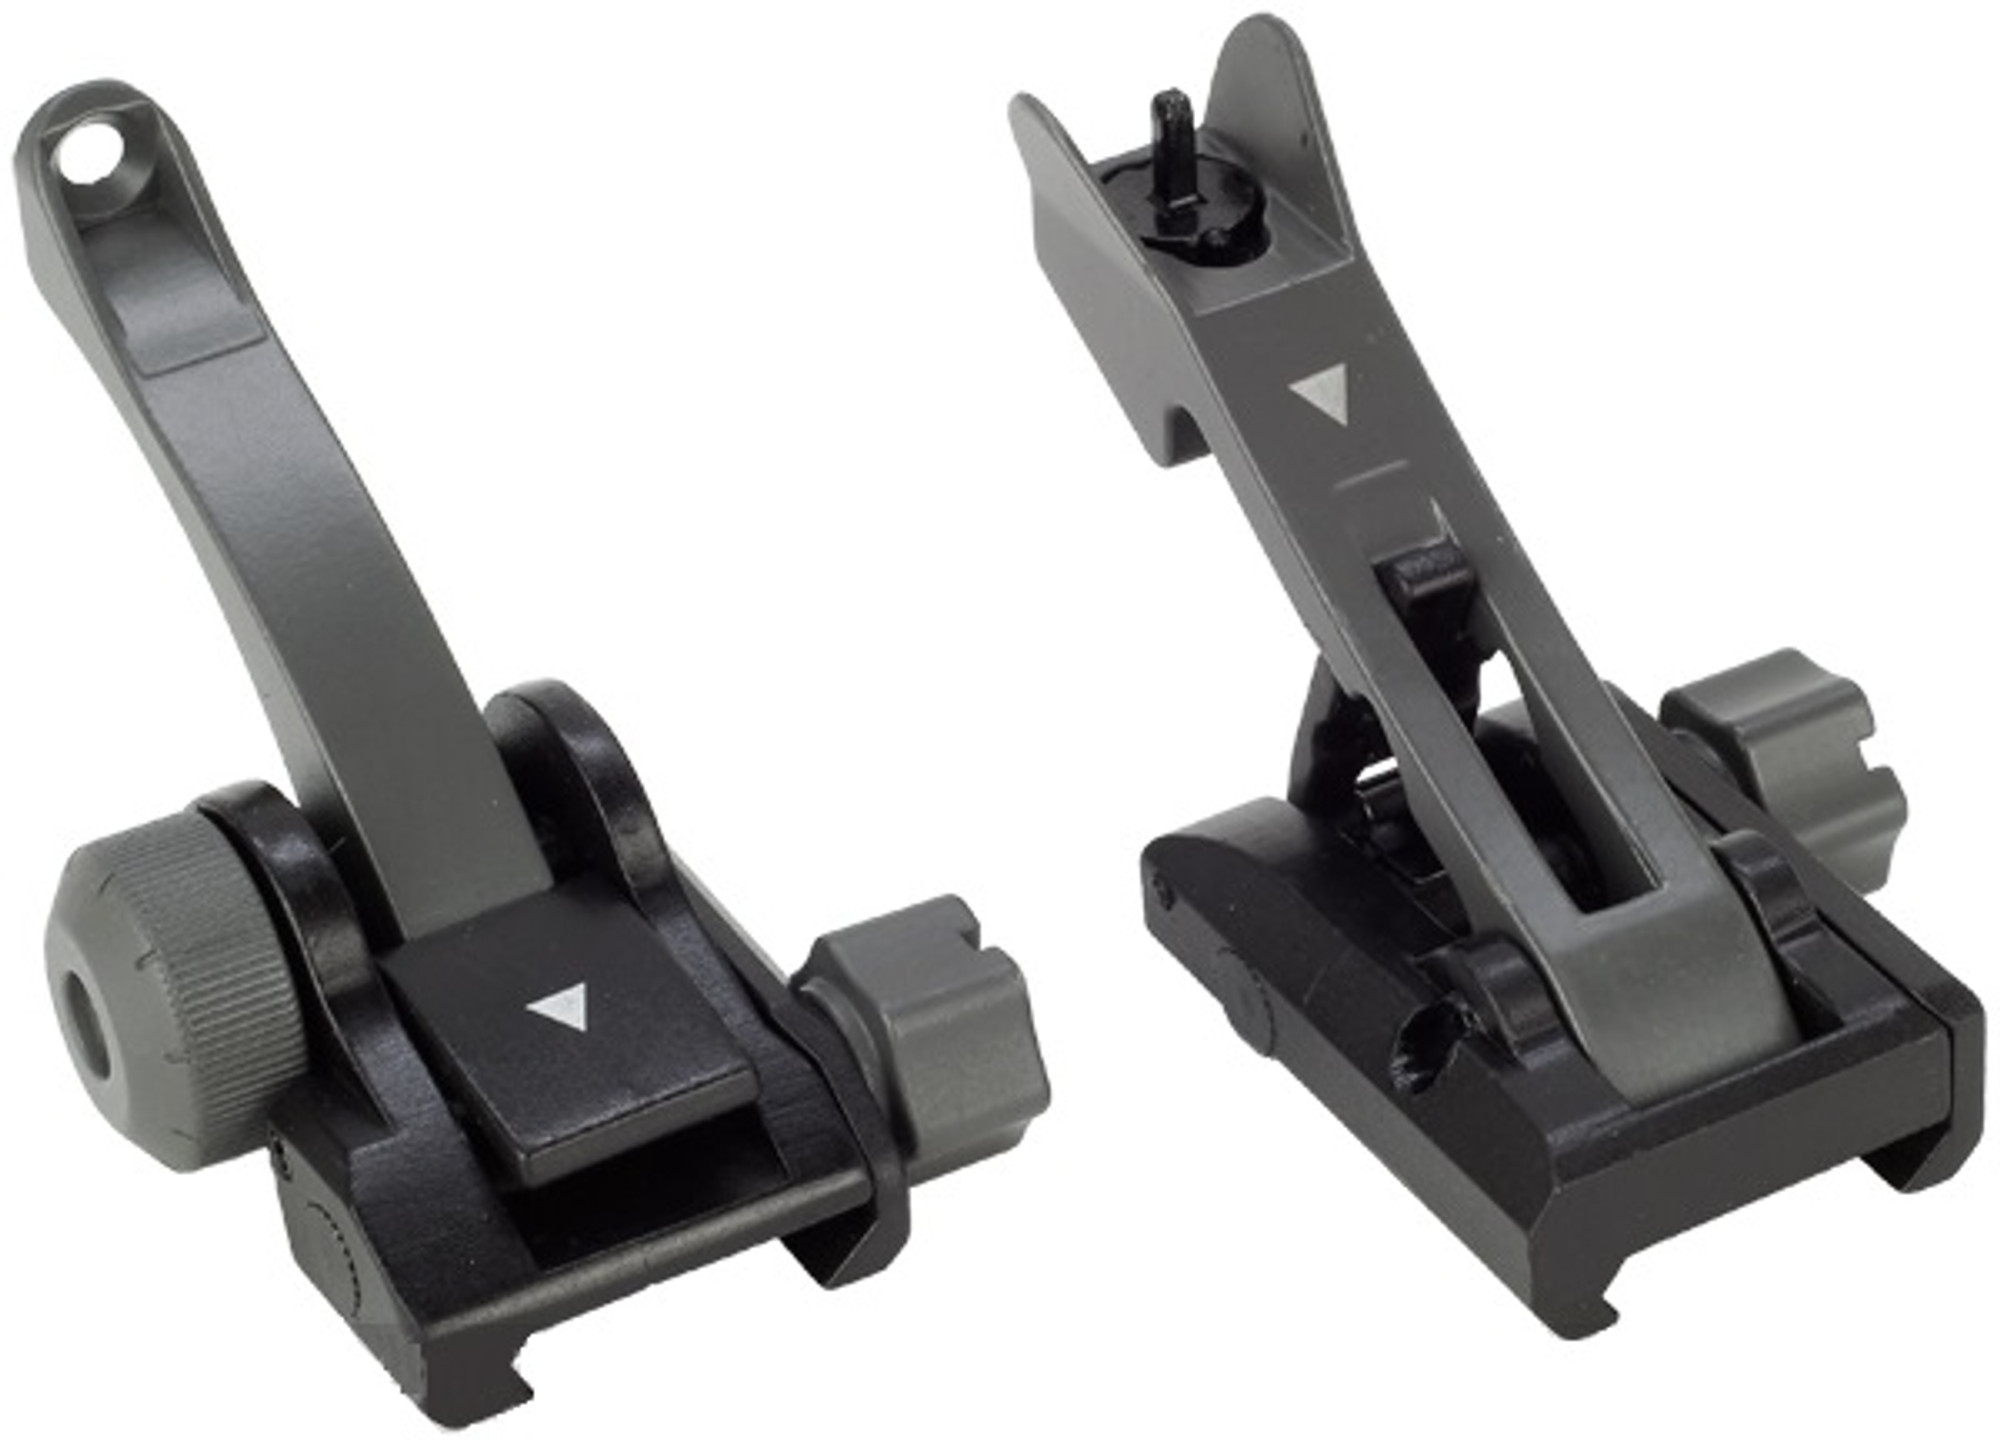 APS QD Catapult Flip-up Front & Rear Sight Set For Airsoft AEG Rifles